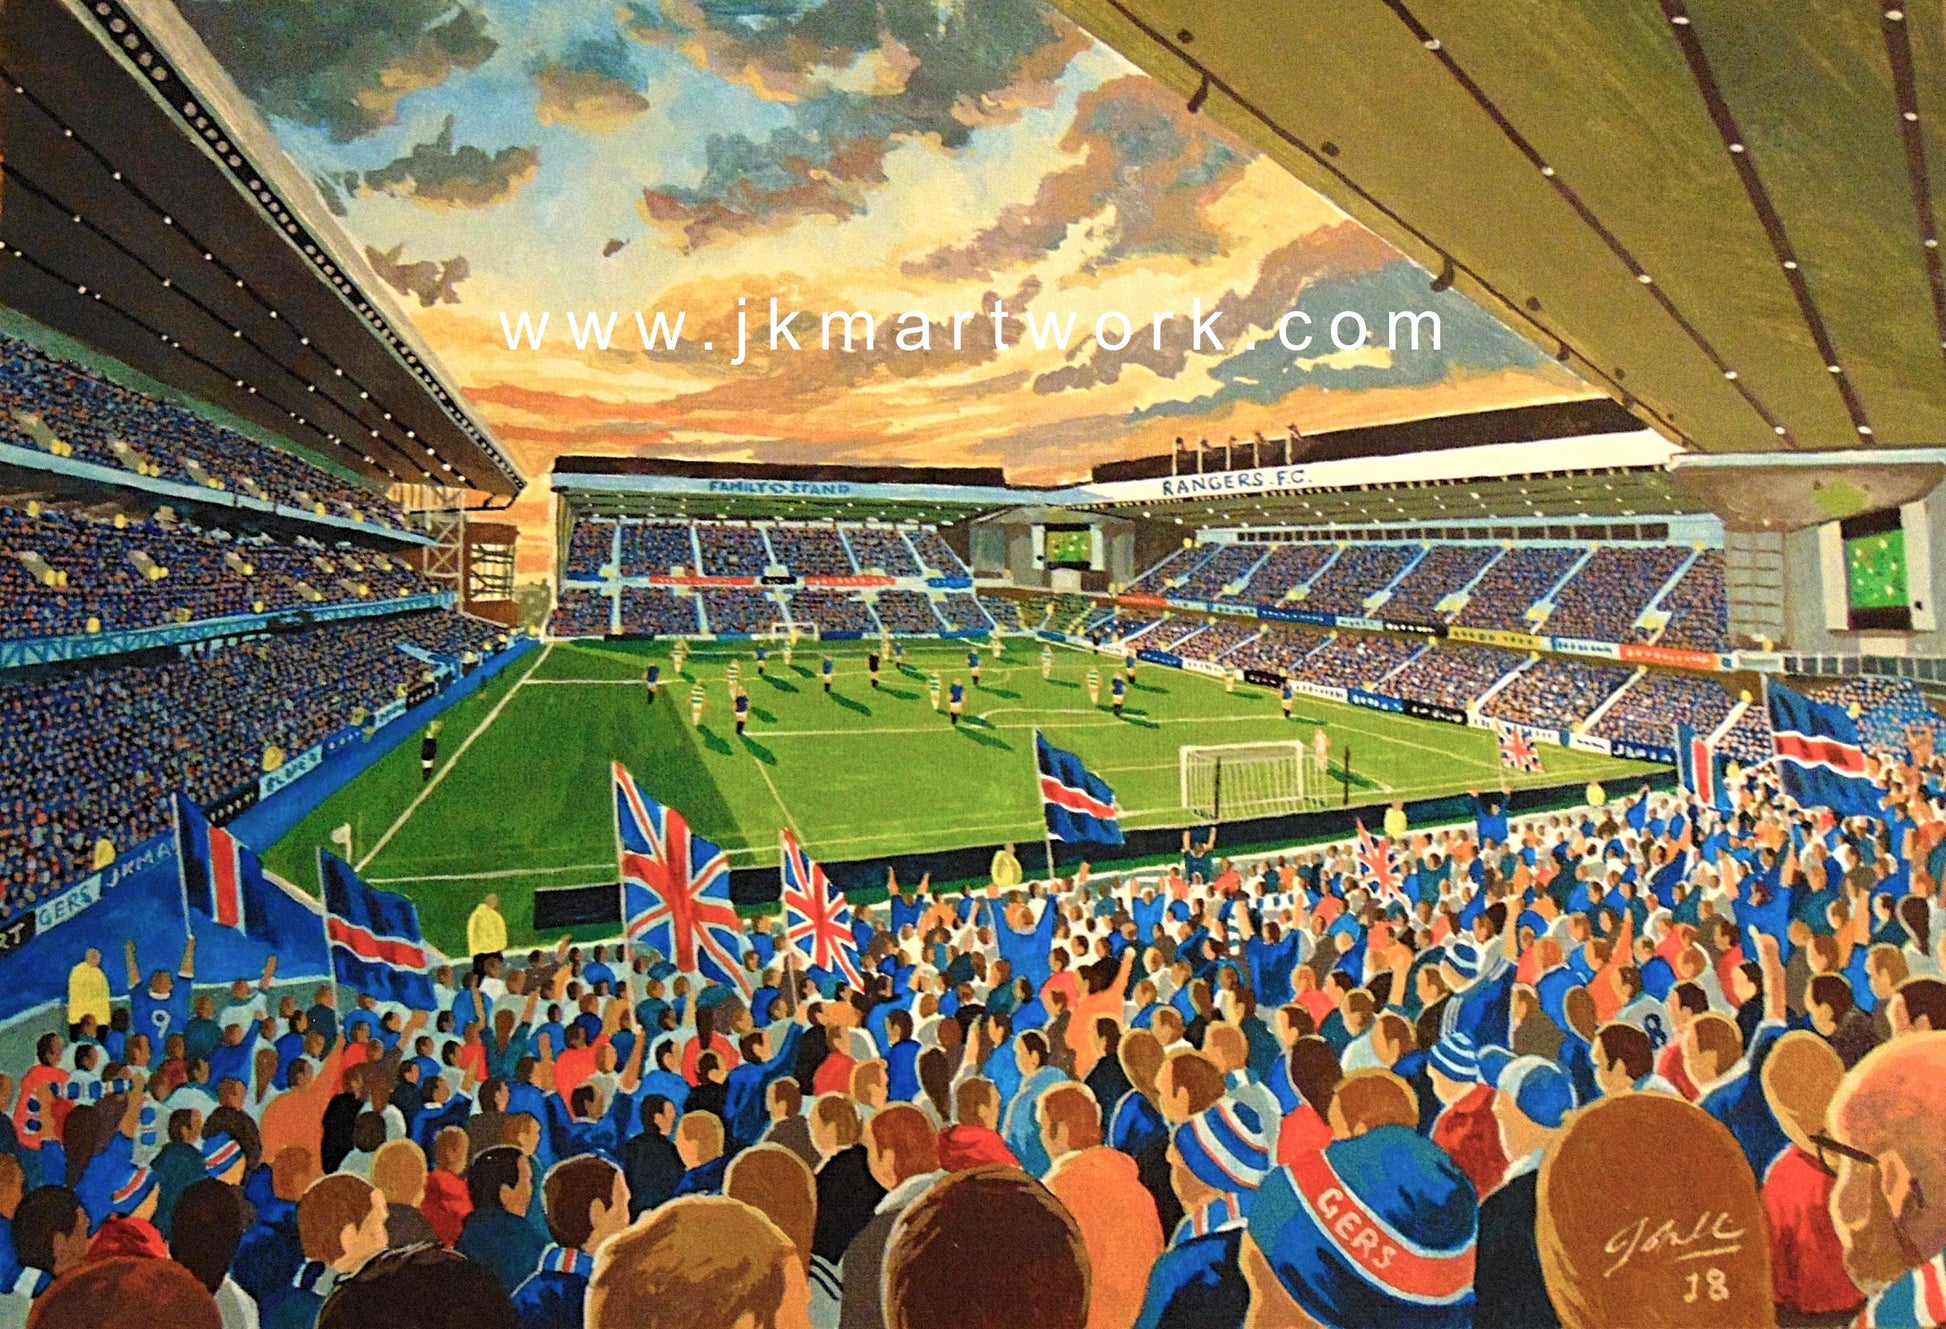 Ibrox on Matchday Artwork - North Section